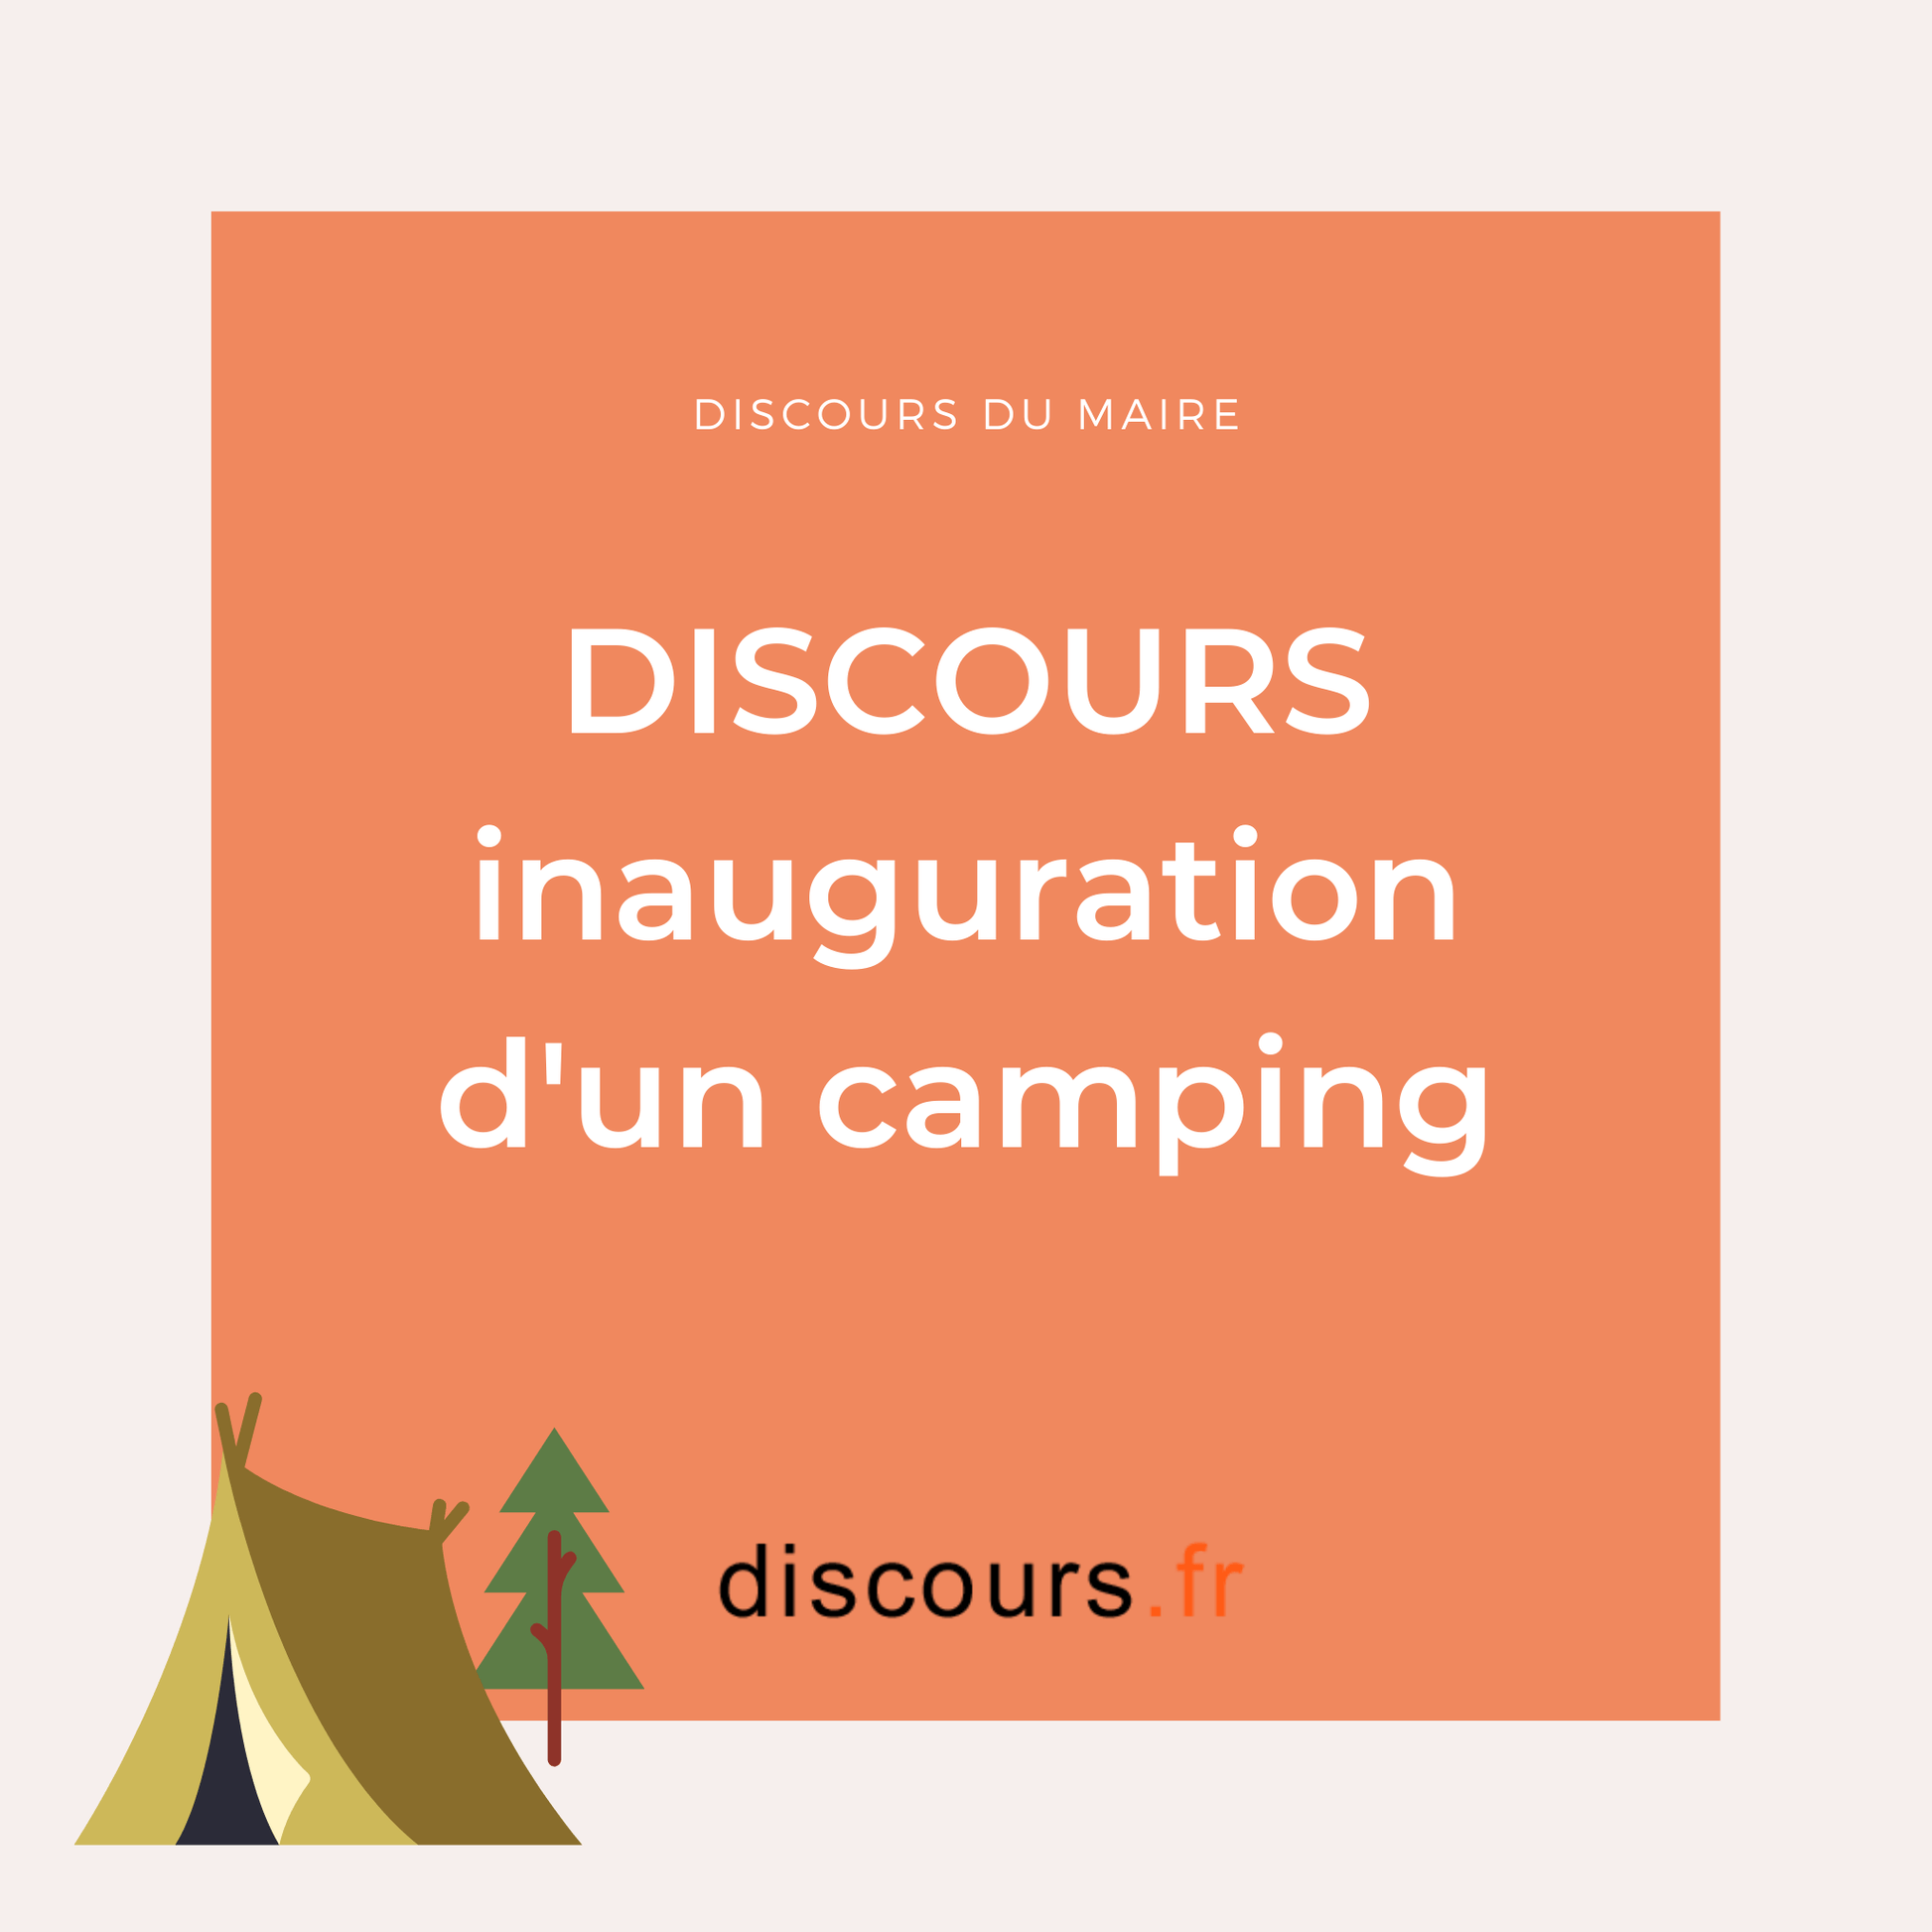 discours inauguration d'un camping